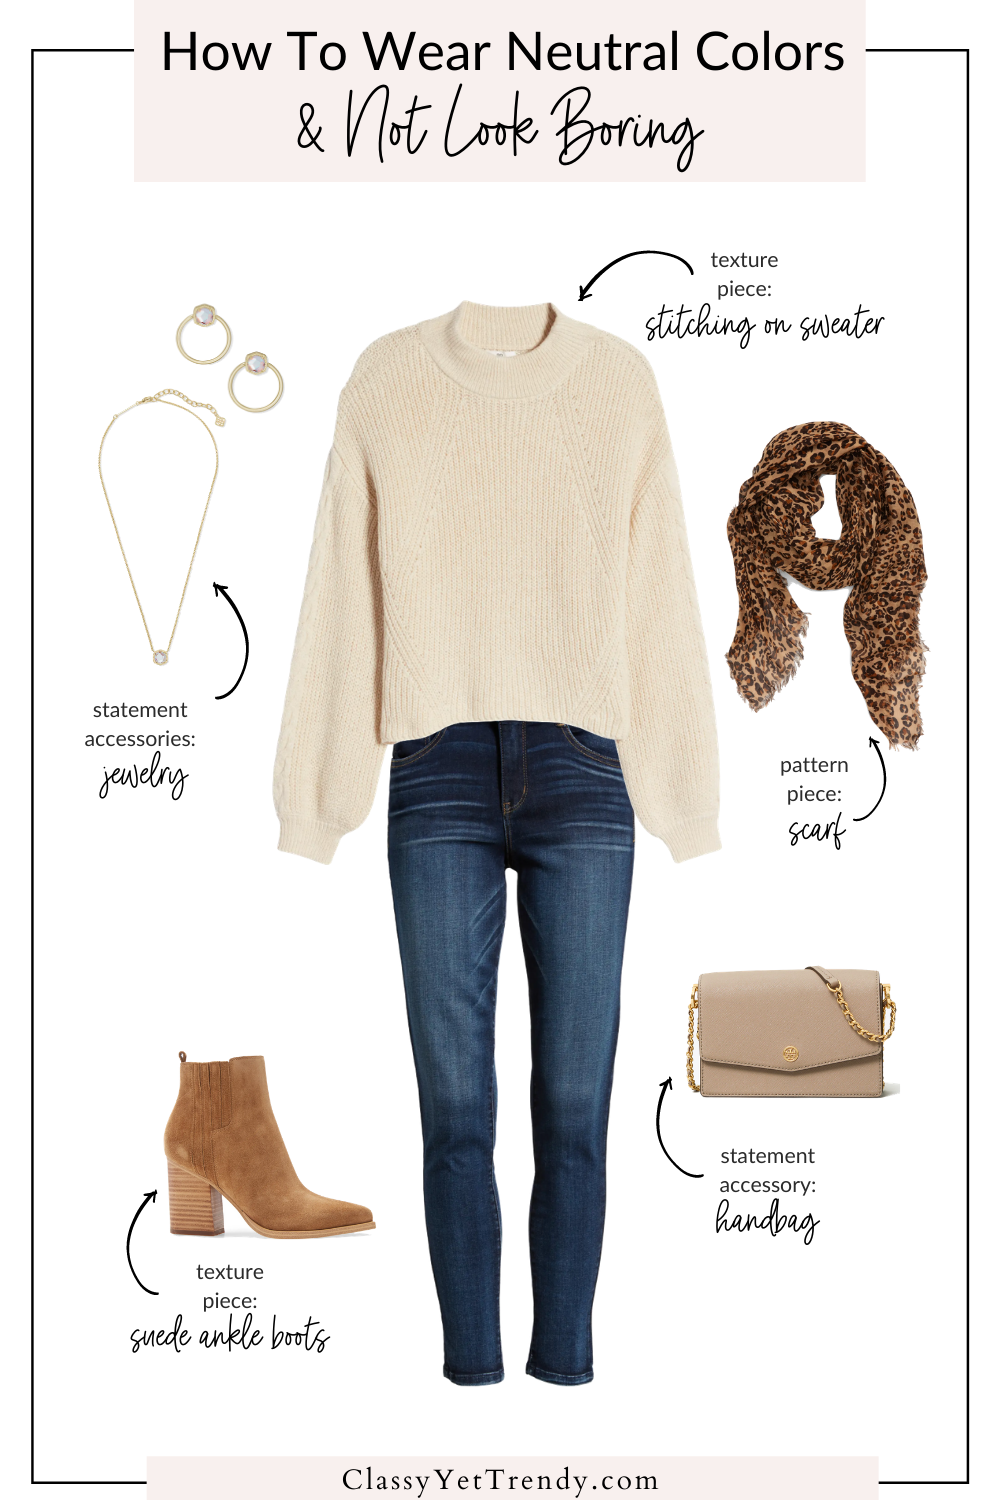 3 Ways to Wear Neutral Colors (and not look boring) - Classy Yet Trendy